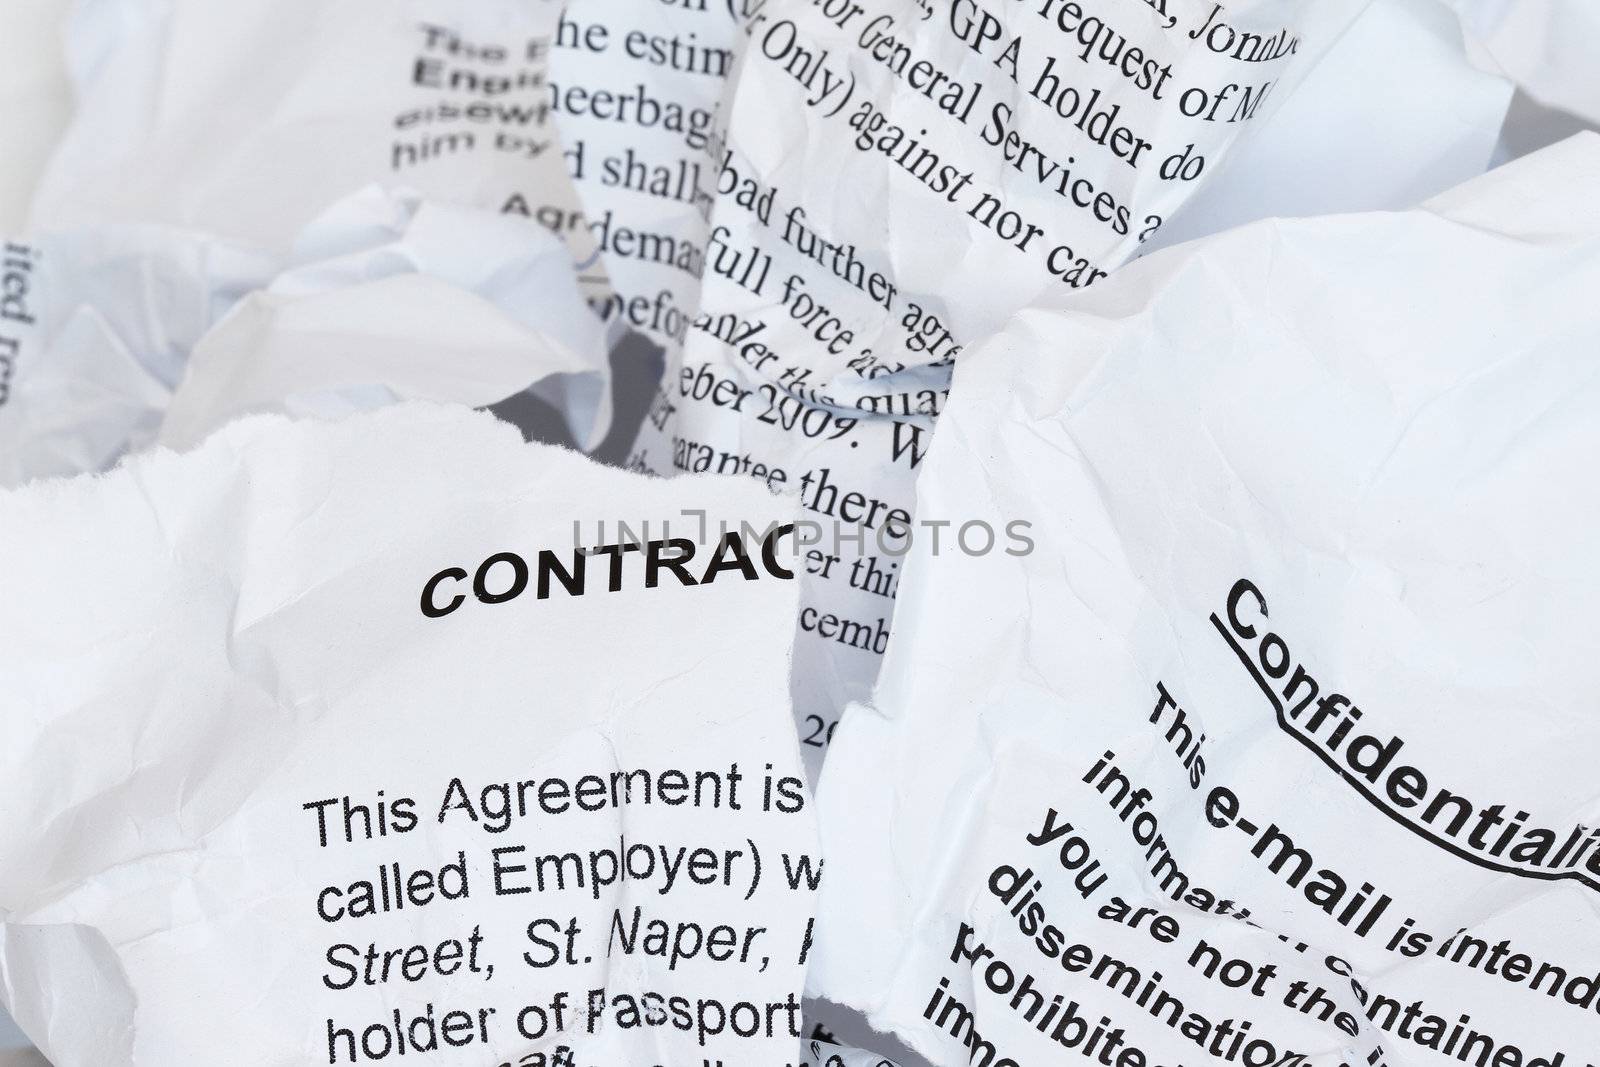 Torn Contract  with confidentiality agreement - many uses for security purpose.